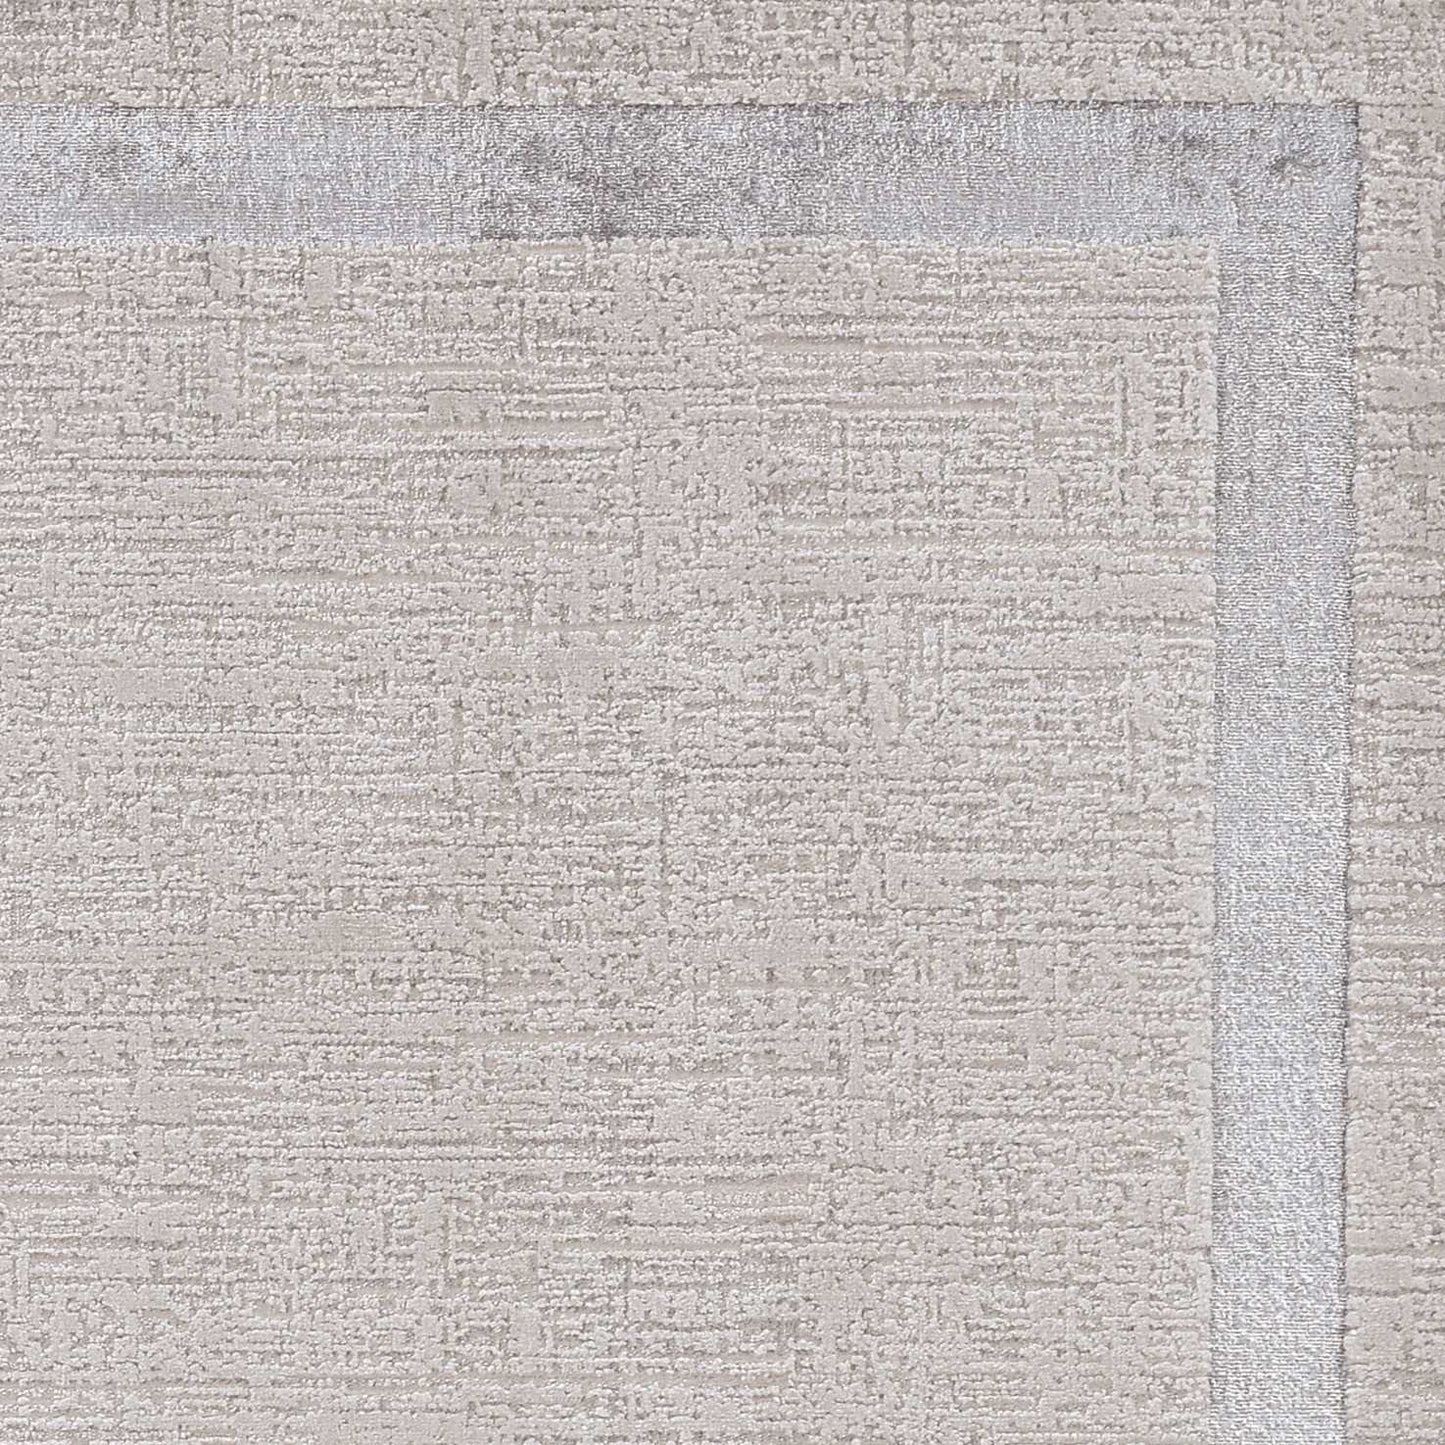 3' X 5' Gray and Ivory Area Rug